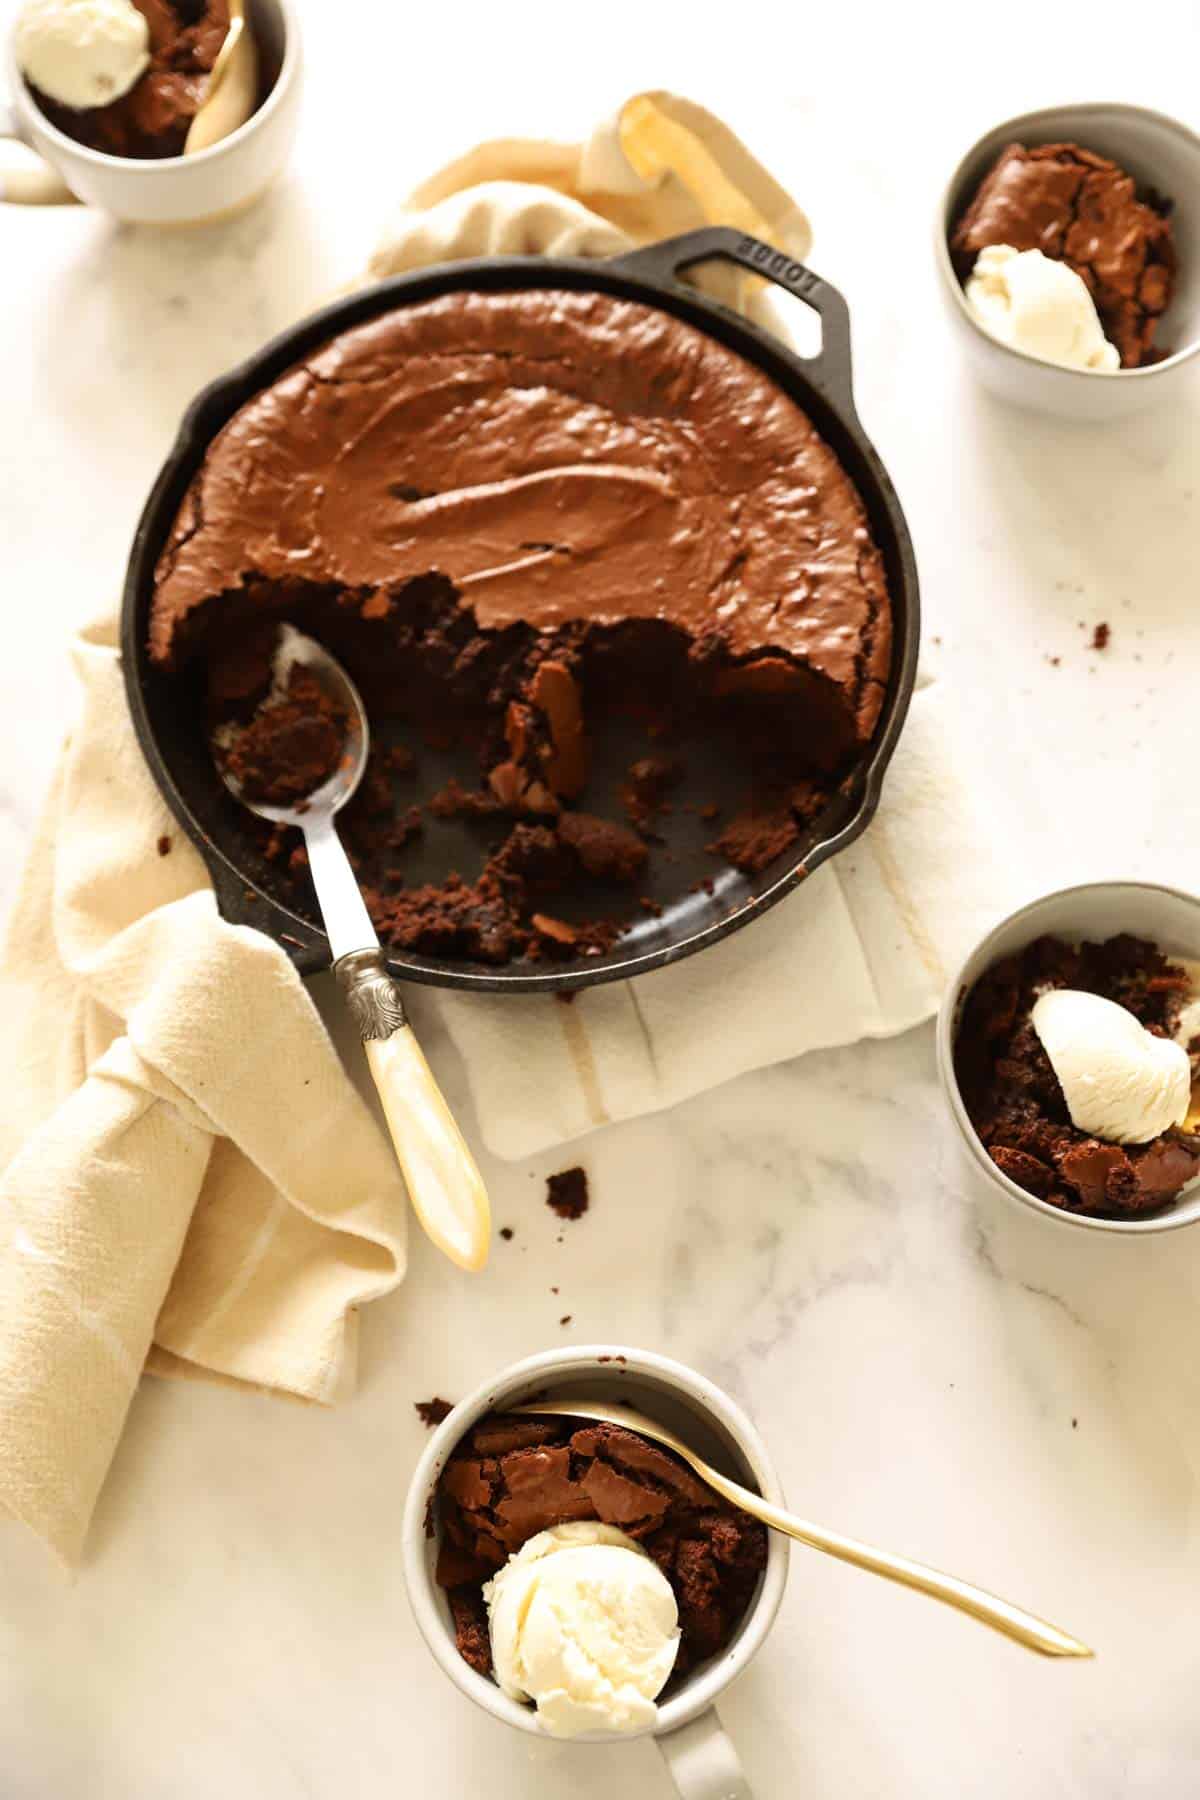 a chocolate skillet cake and 3 bowls served with cake and ice cream